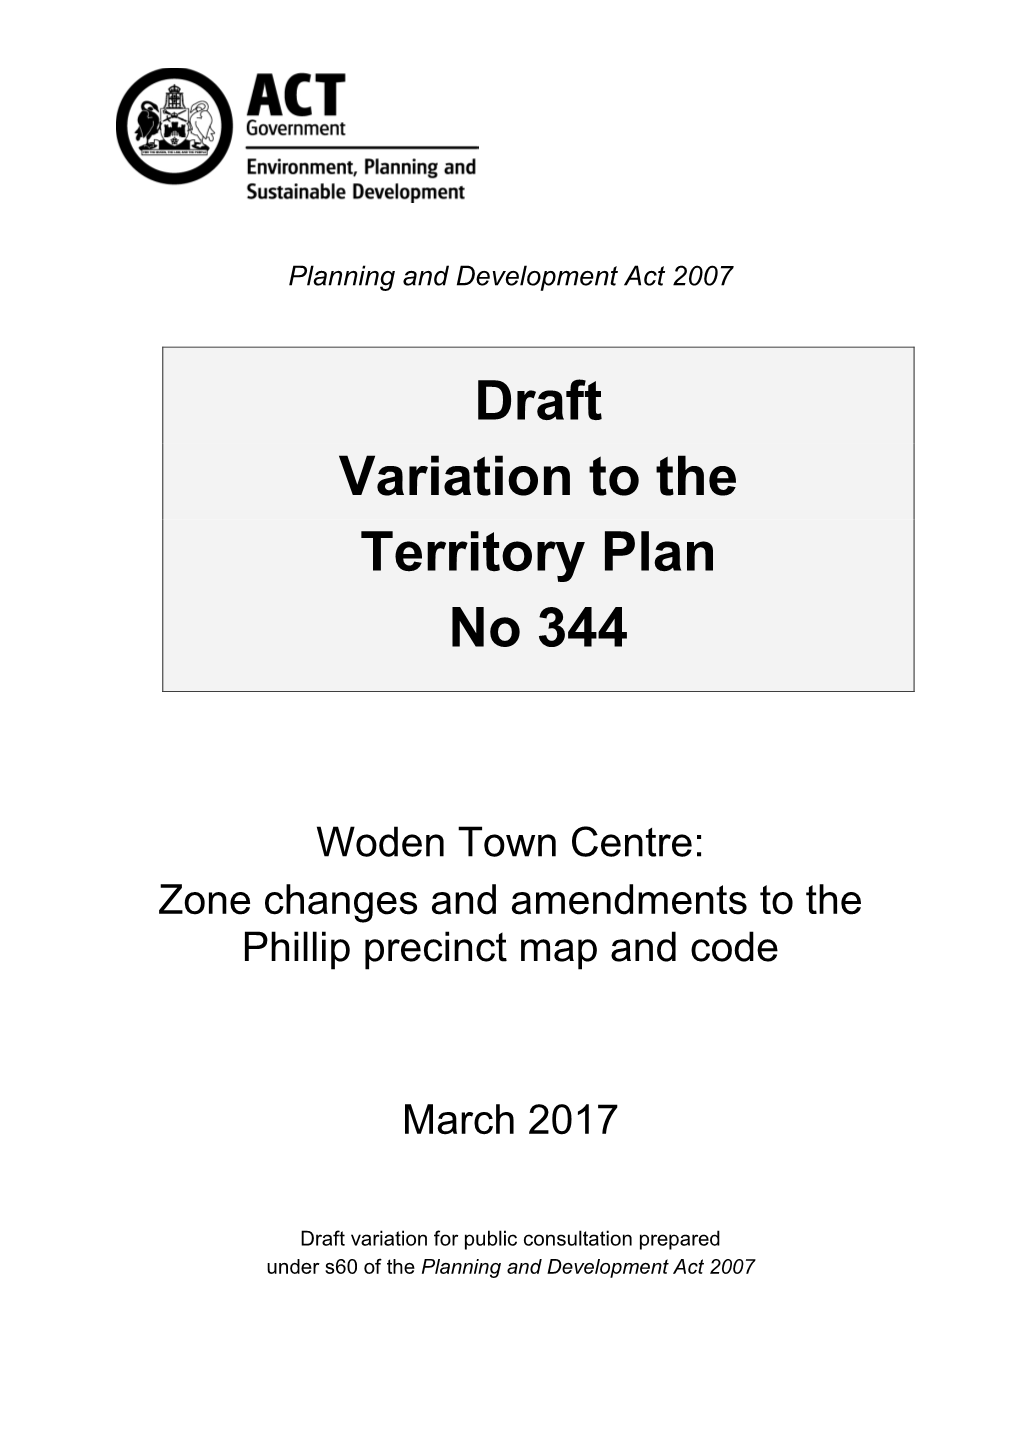 Woden Town Centre: Zone Changes and Amendments to the Phillip Precinct Map and Code